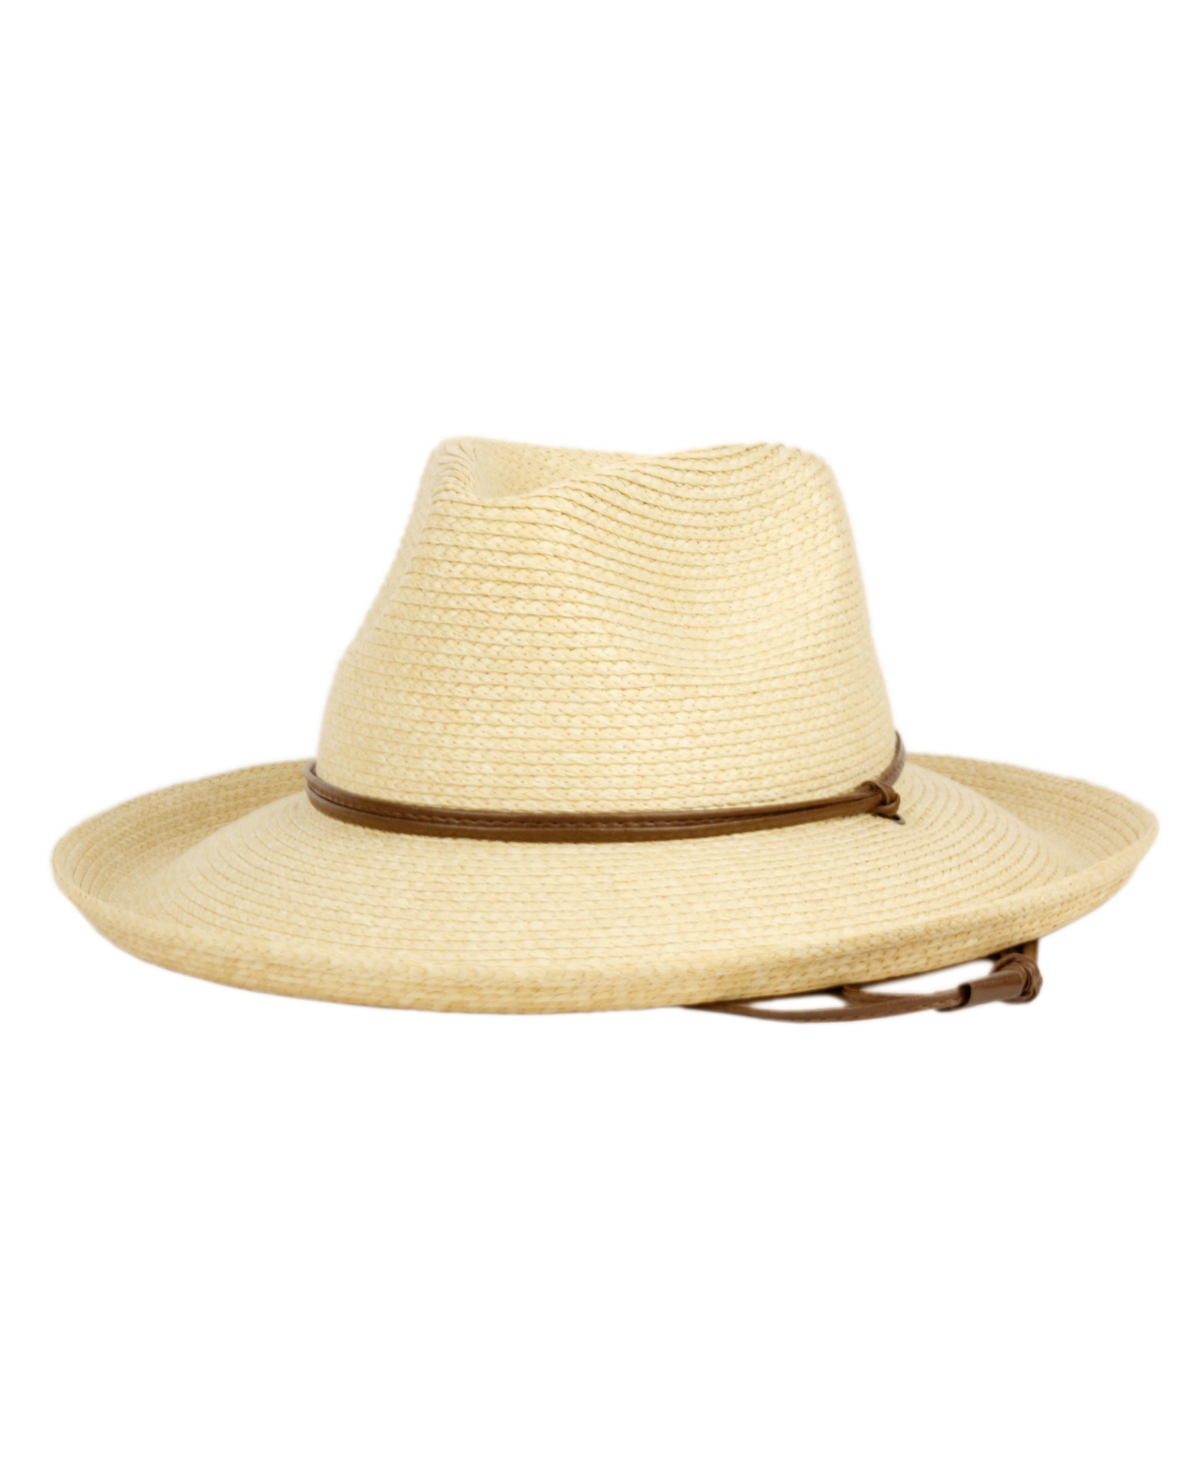 Straw Fedora Sun Hat with Chin Cord - Natural